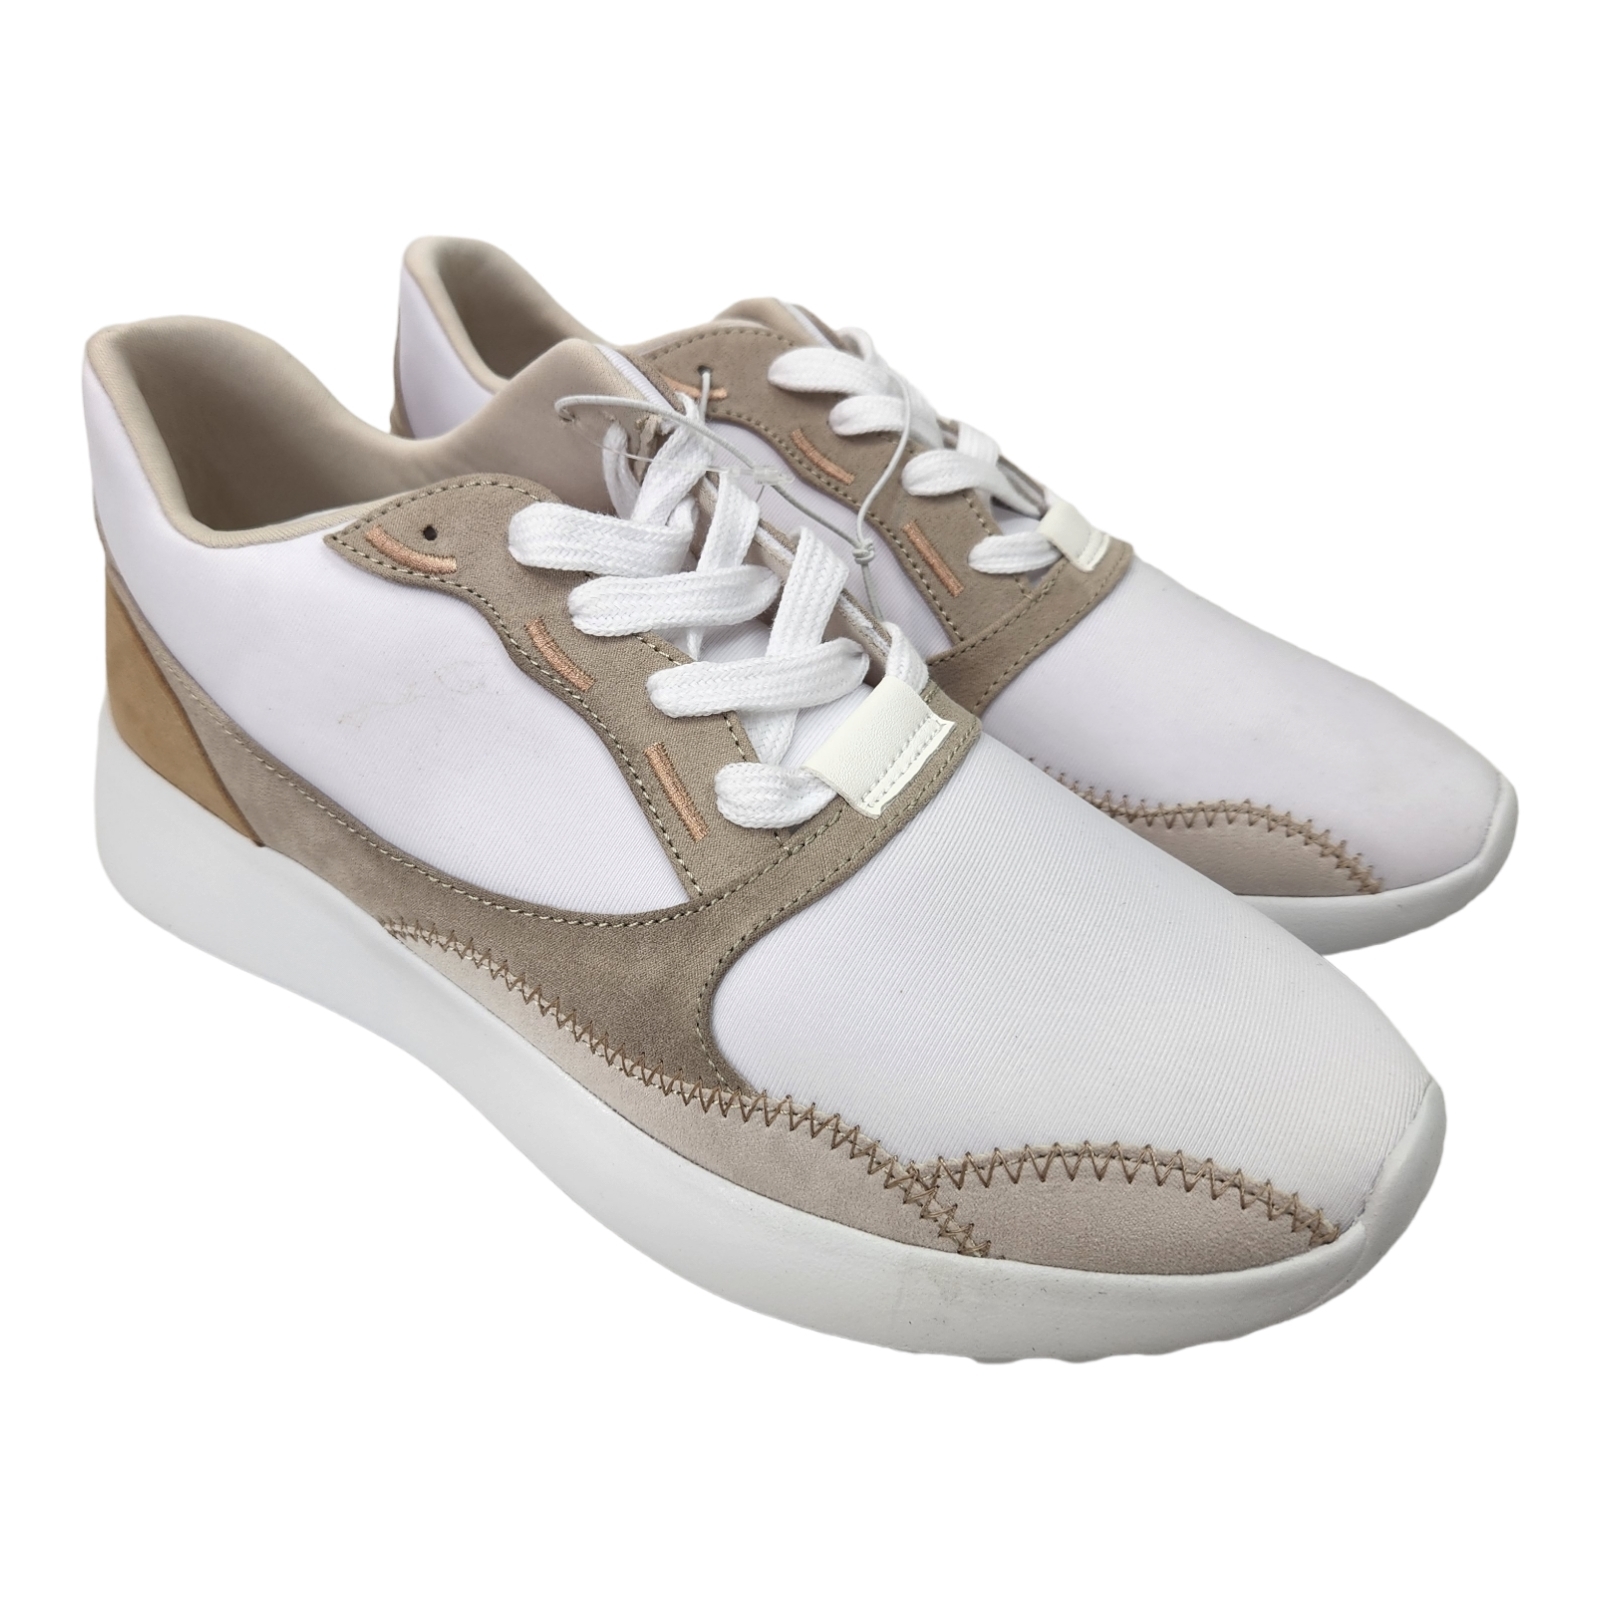 Primary image for A New Day Women's Size 6.5 White And Tan Reign Casual Sneakers